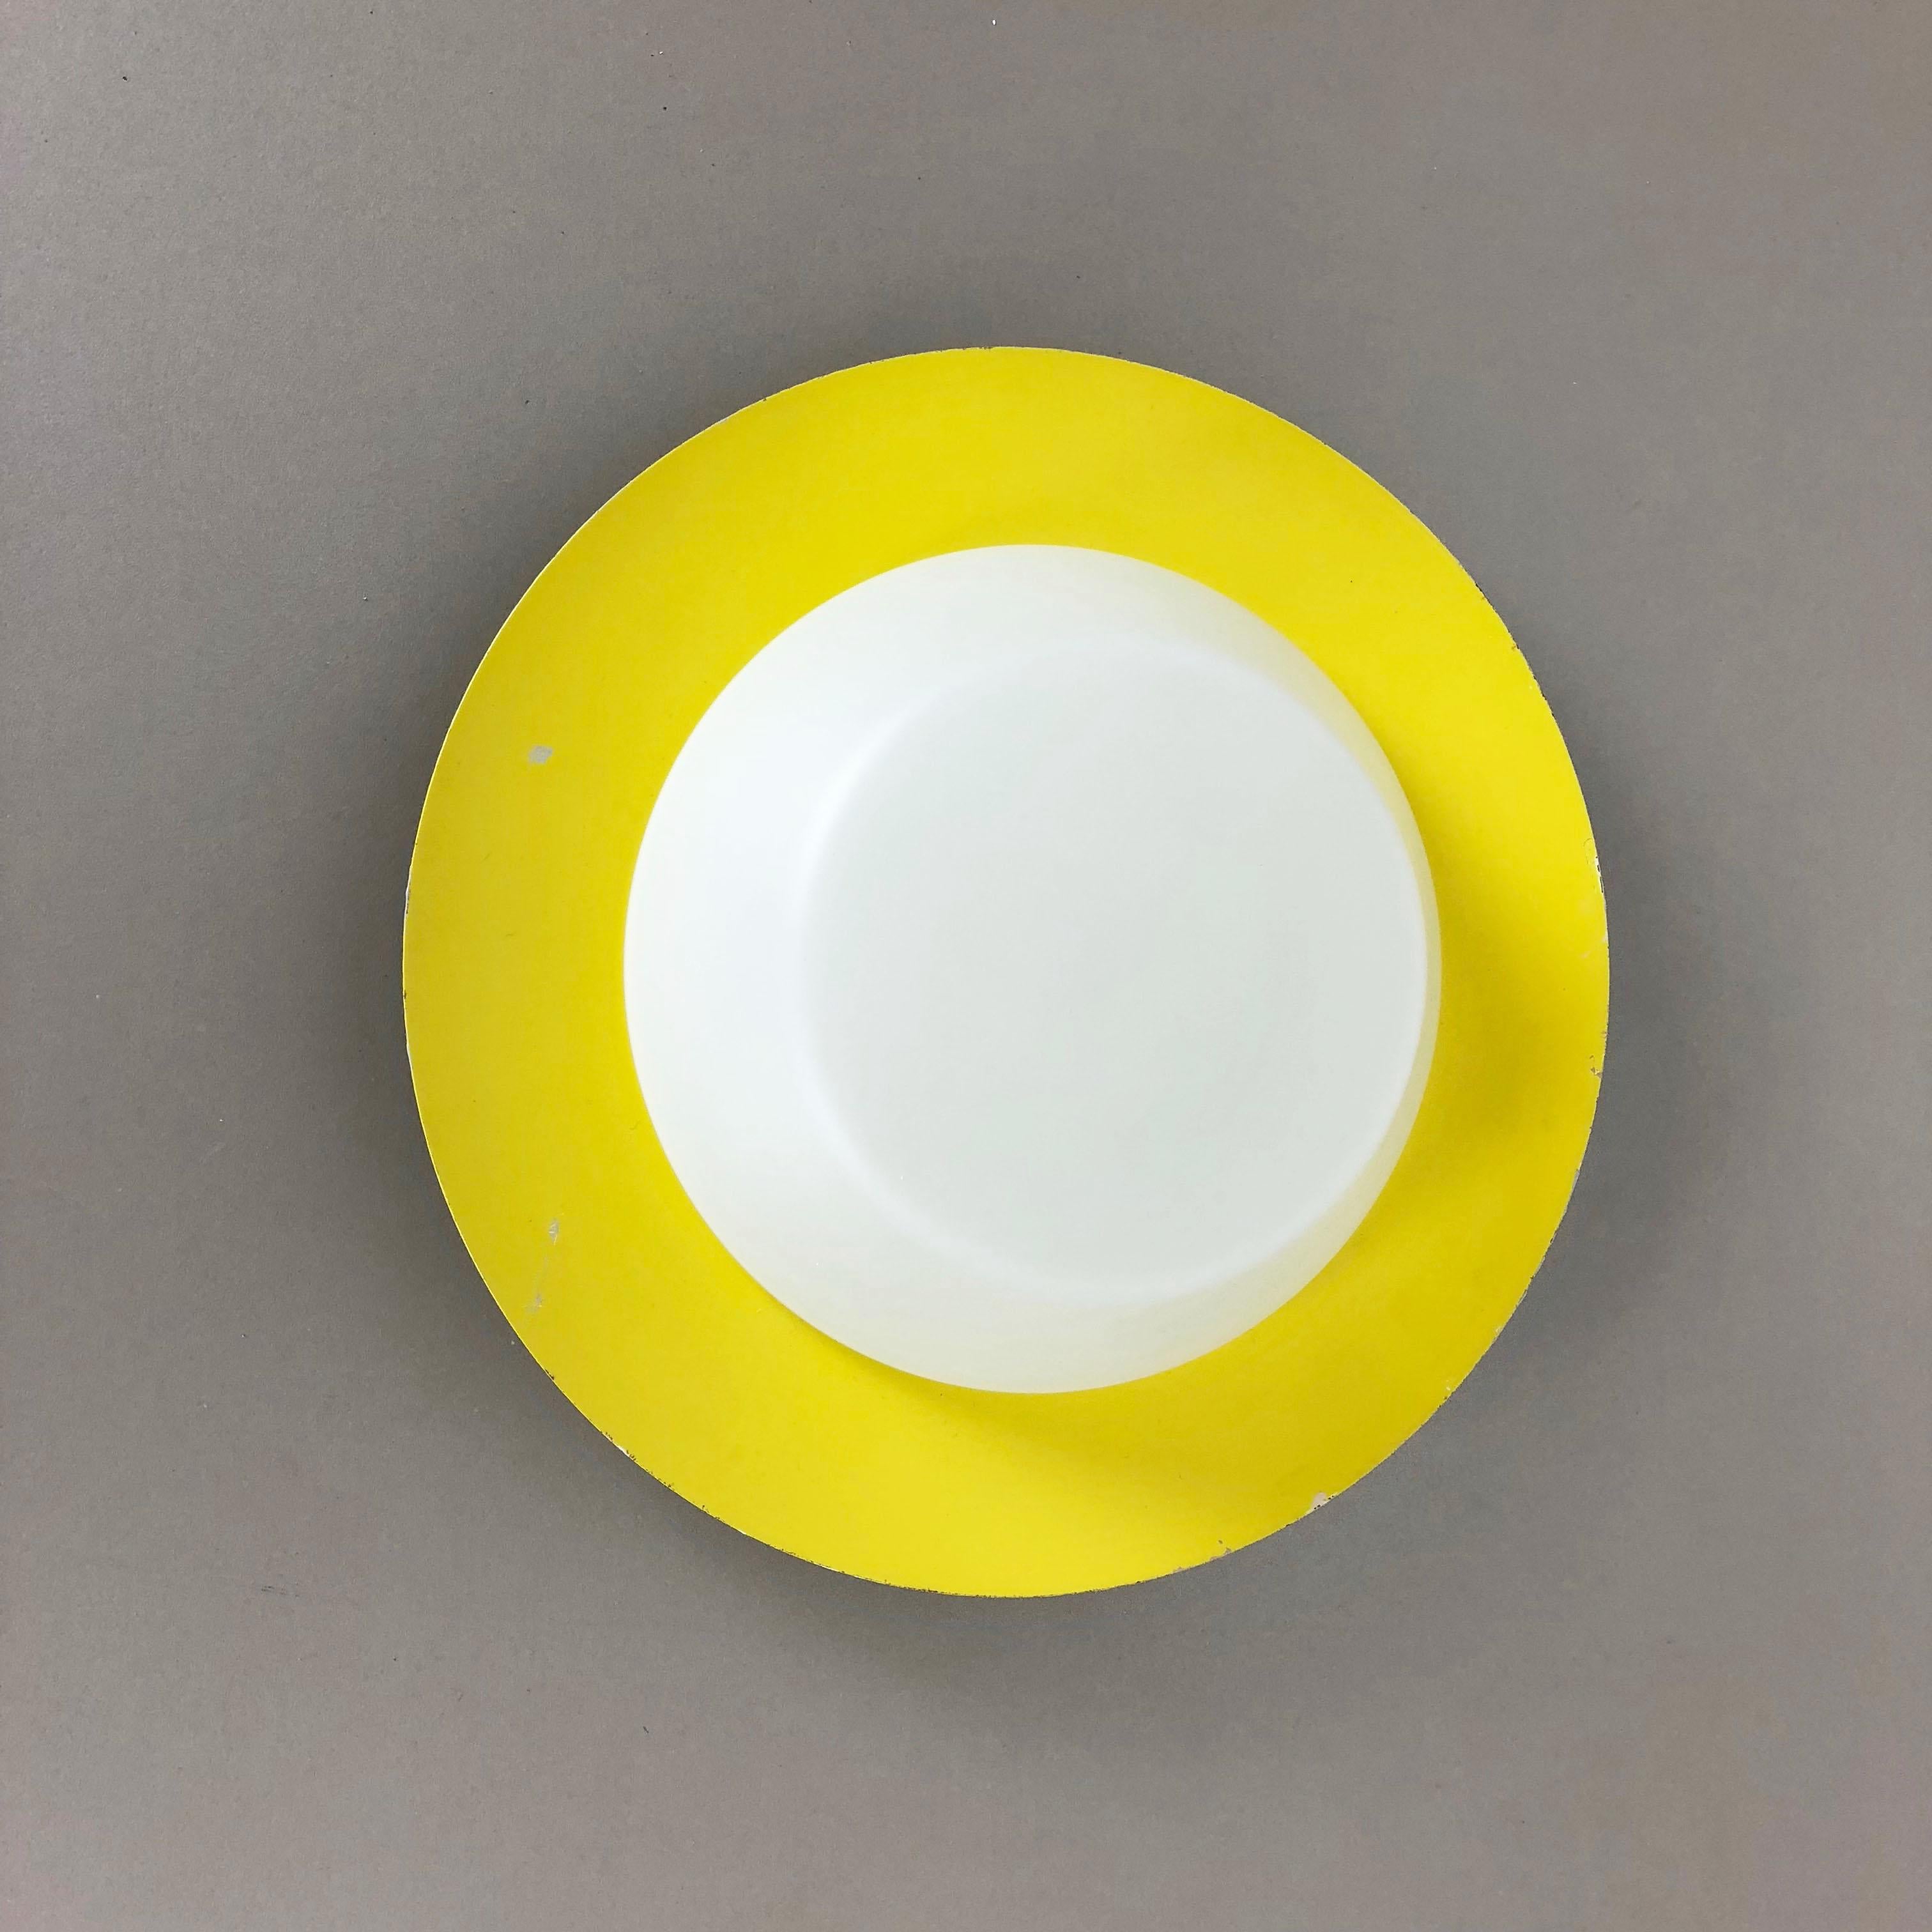 Mid-Century Modern Large Stilnovo Style Metal Opaline Glass Wall Light, Yellow, Italy, 1960s For Sale